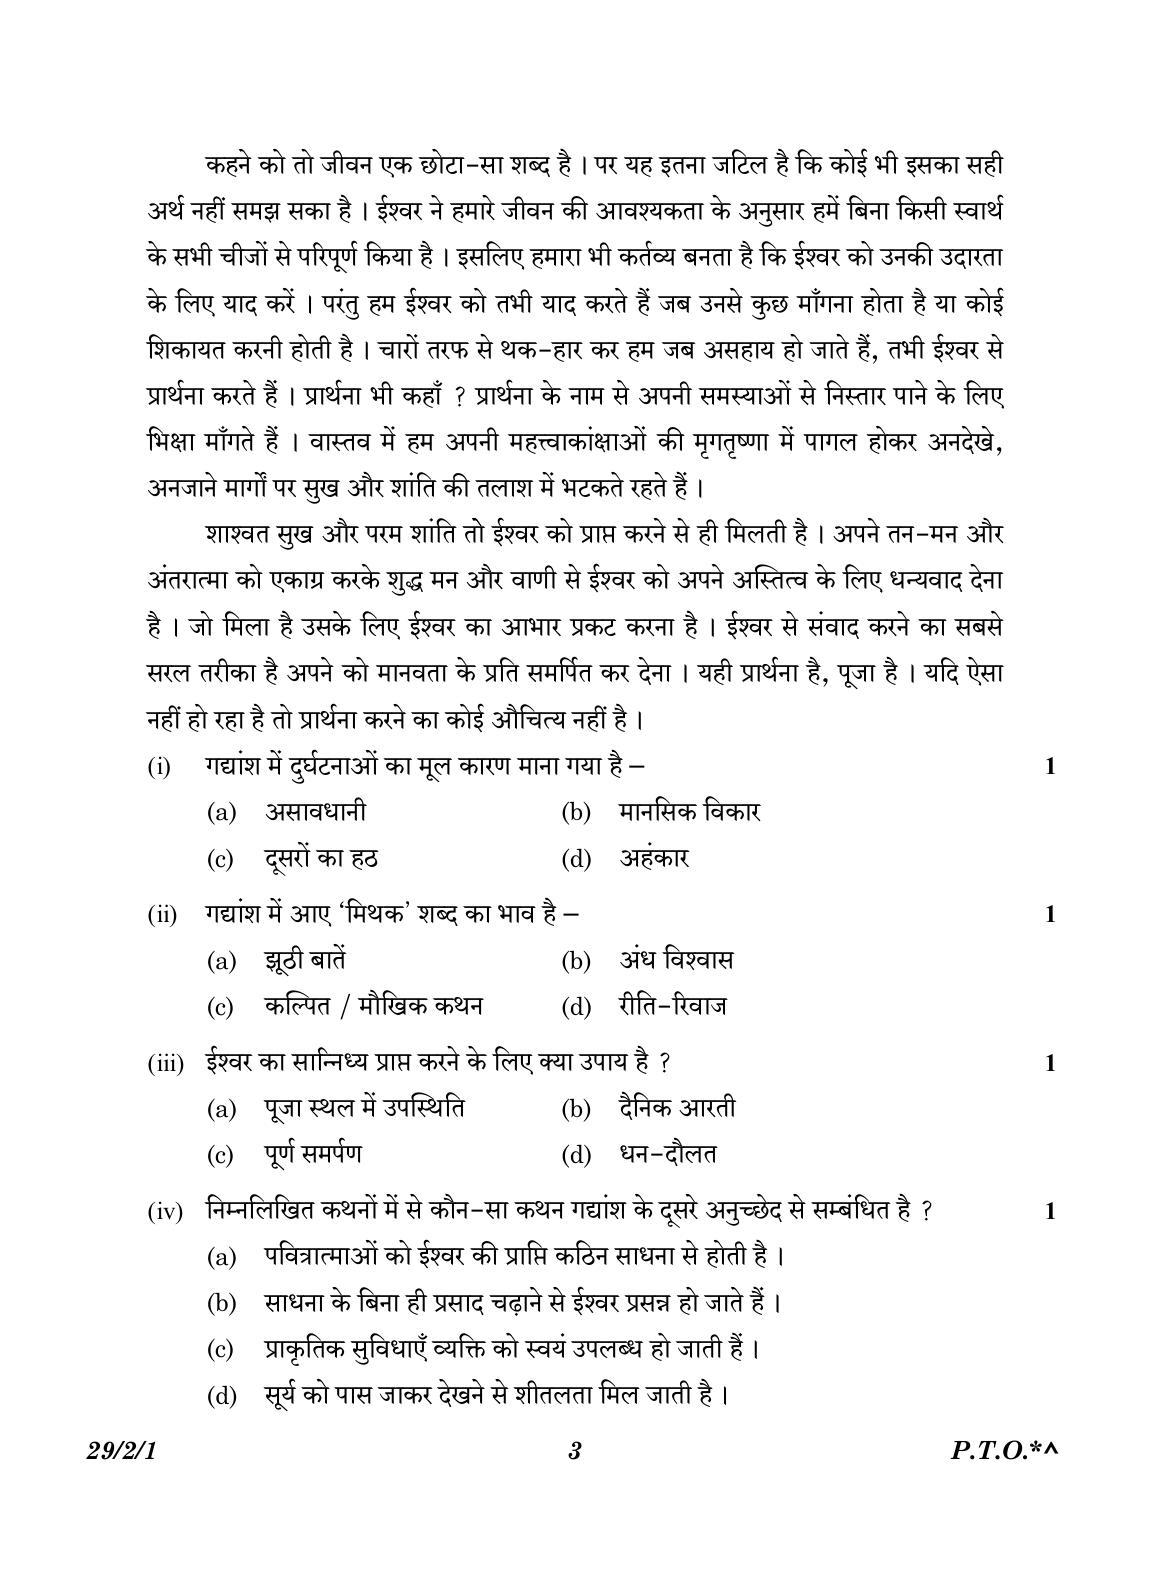 CBSE Class 12 29-2-1 Hindi Elective 2023 Question Paper - Page 3